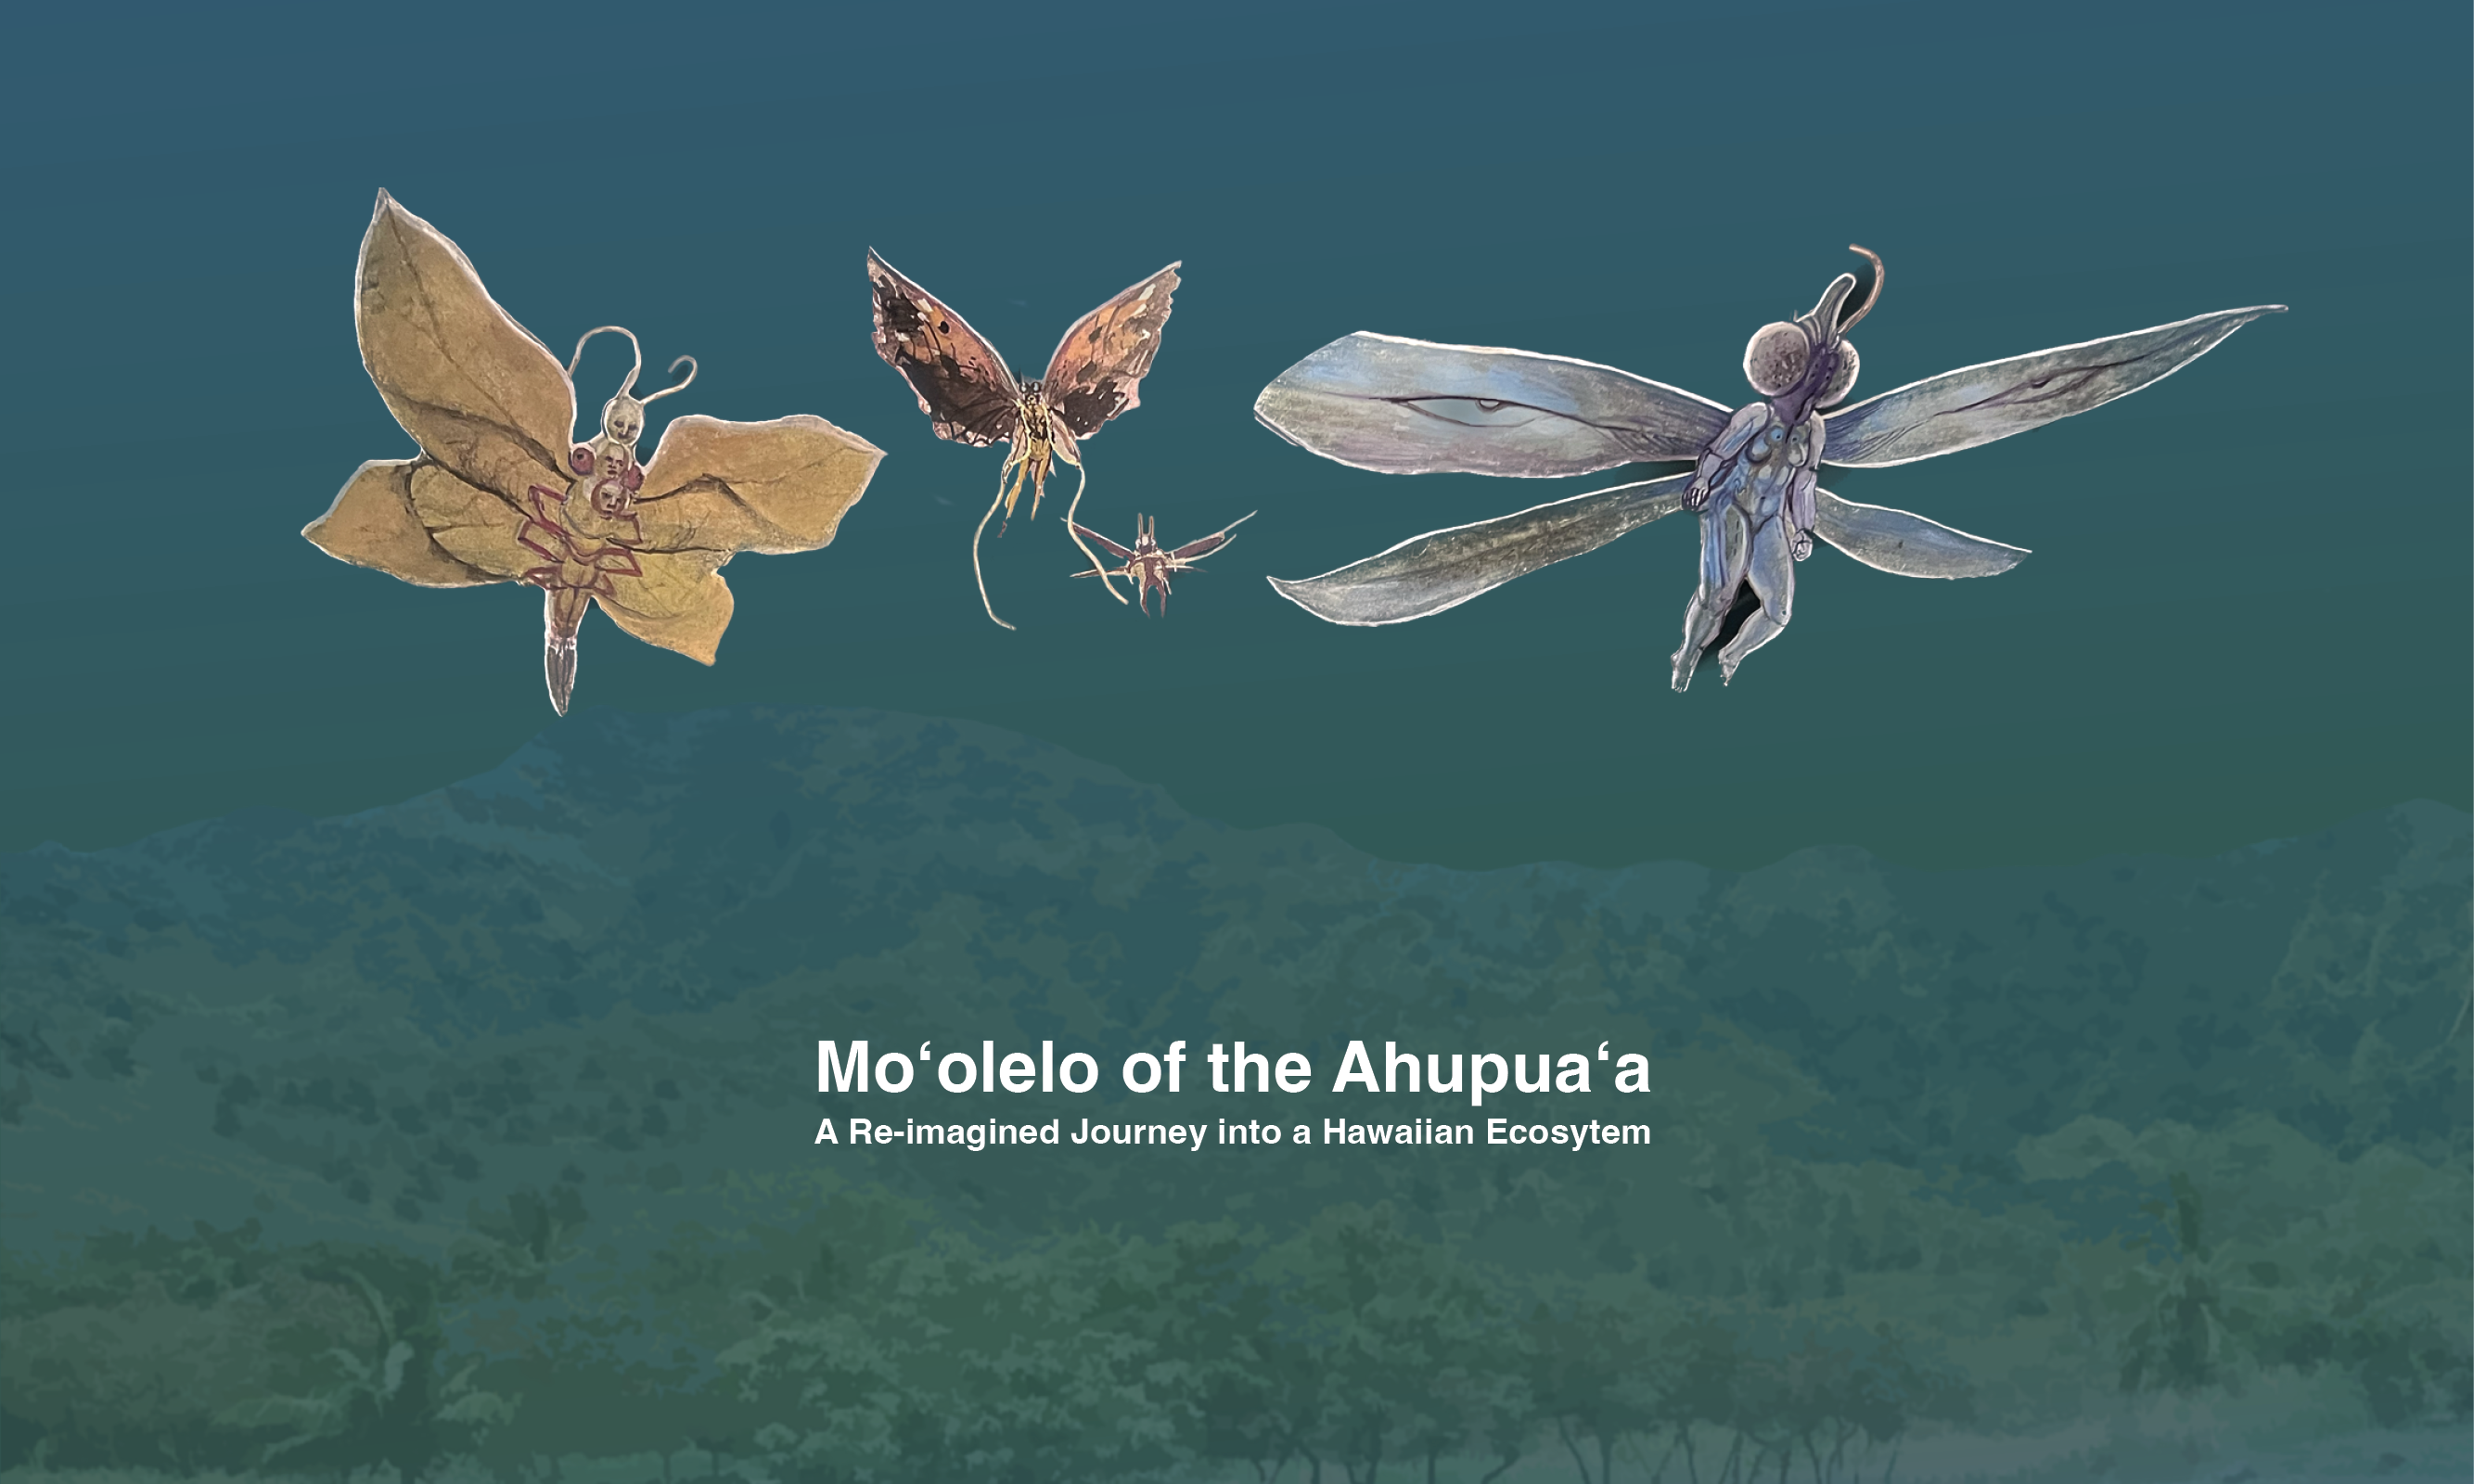 Mythical insect-humanoid characters fly above a mountain with text overlay: Mo‘olelo of the Ahupuaʻa - A Re-imagined Journey into a Hawaiian Ecosytem